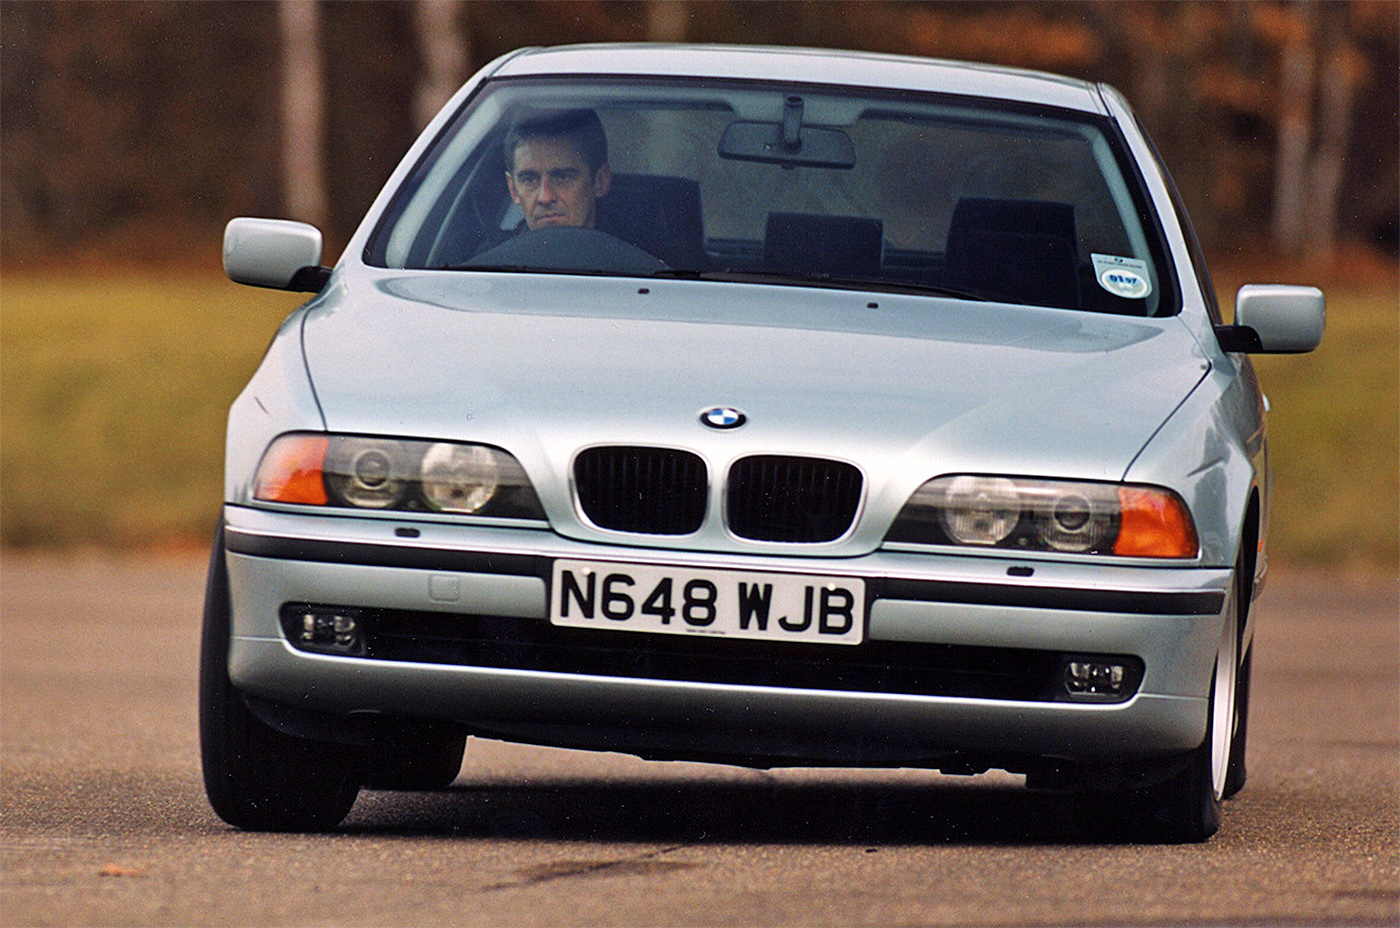 Top cars from the 90s to buy now